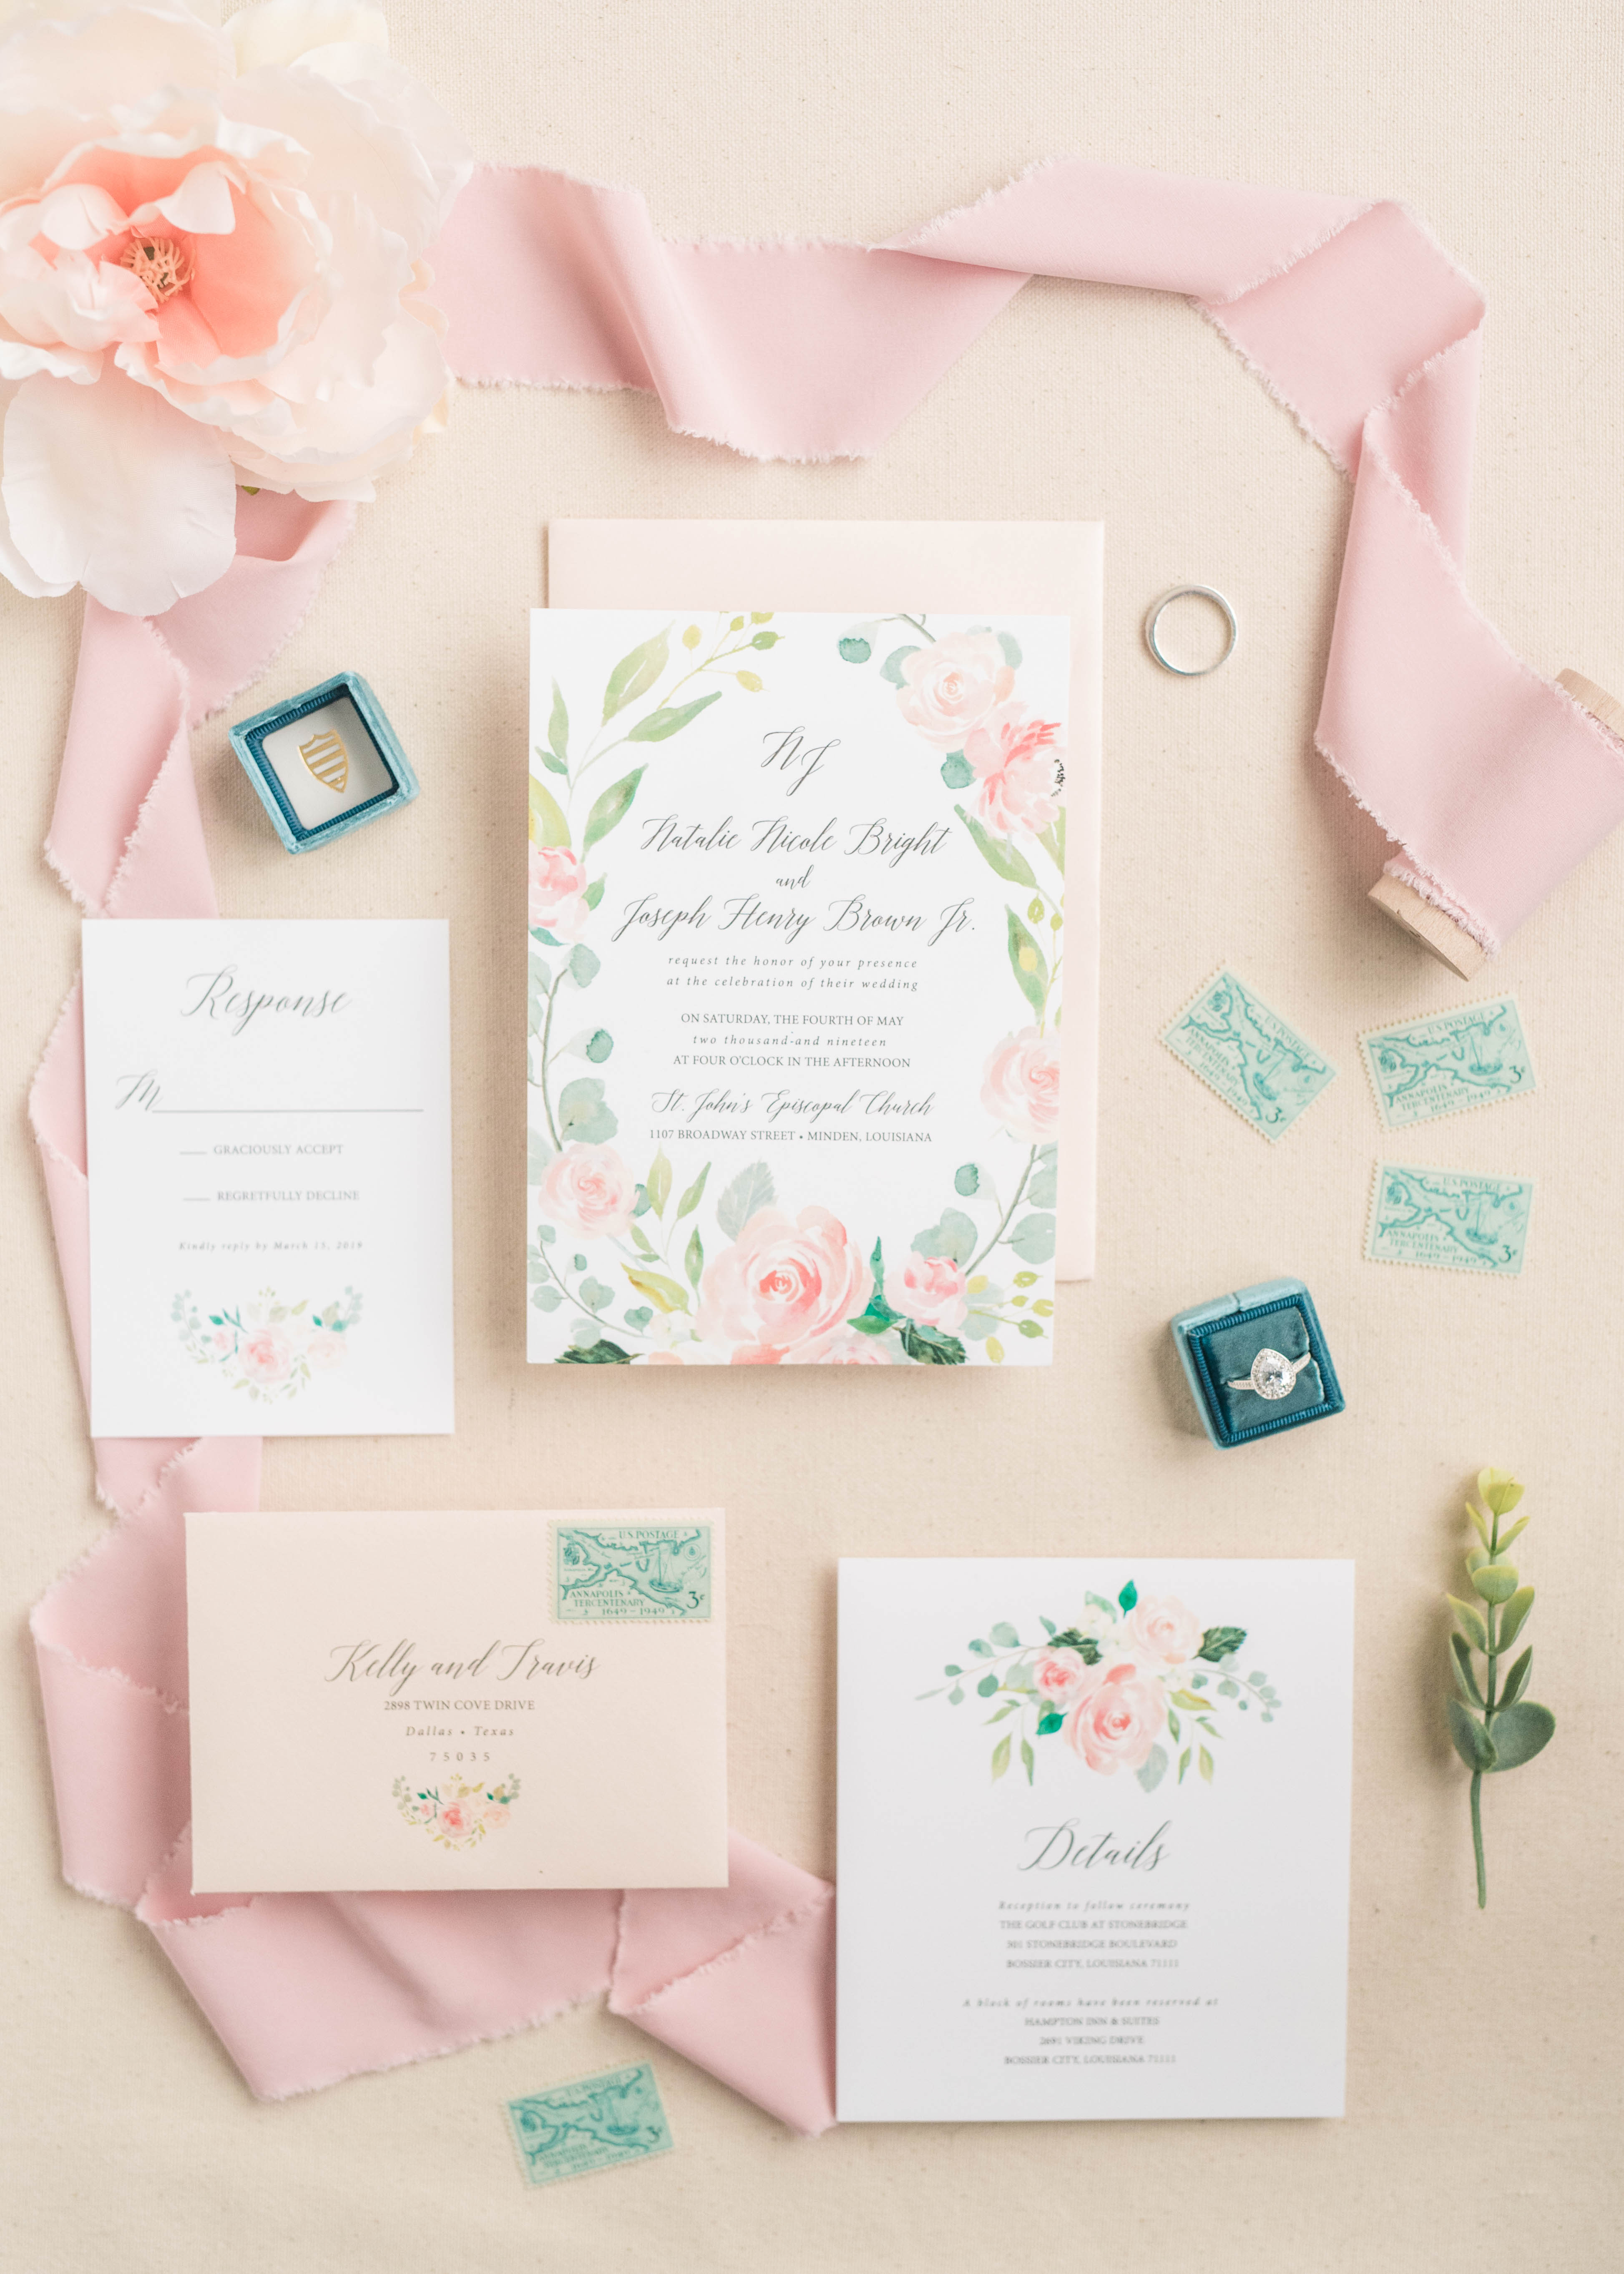 wedding invitation, details, and engagement ring, styled with ribbon and floral accents